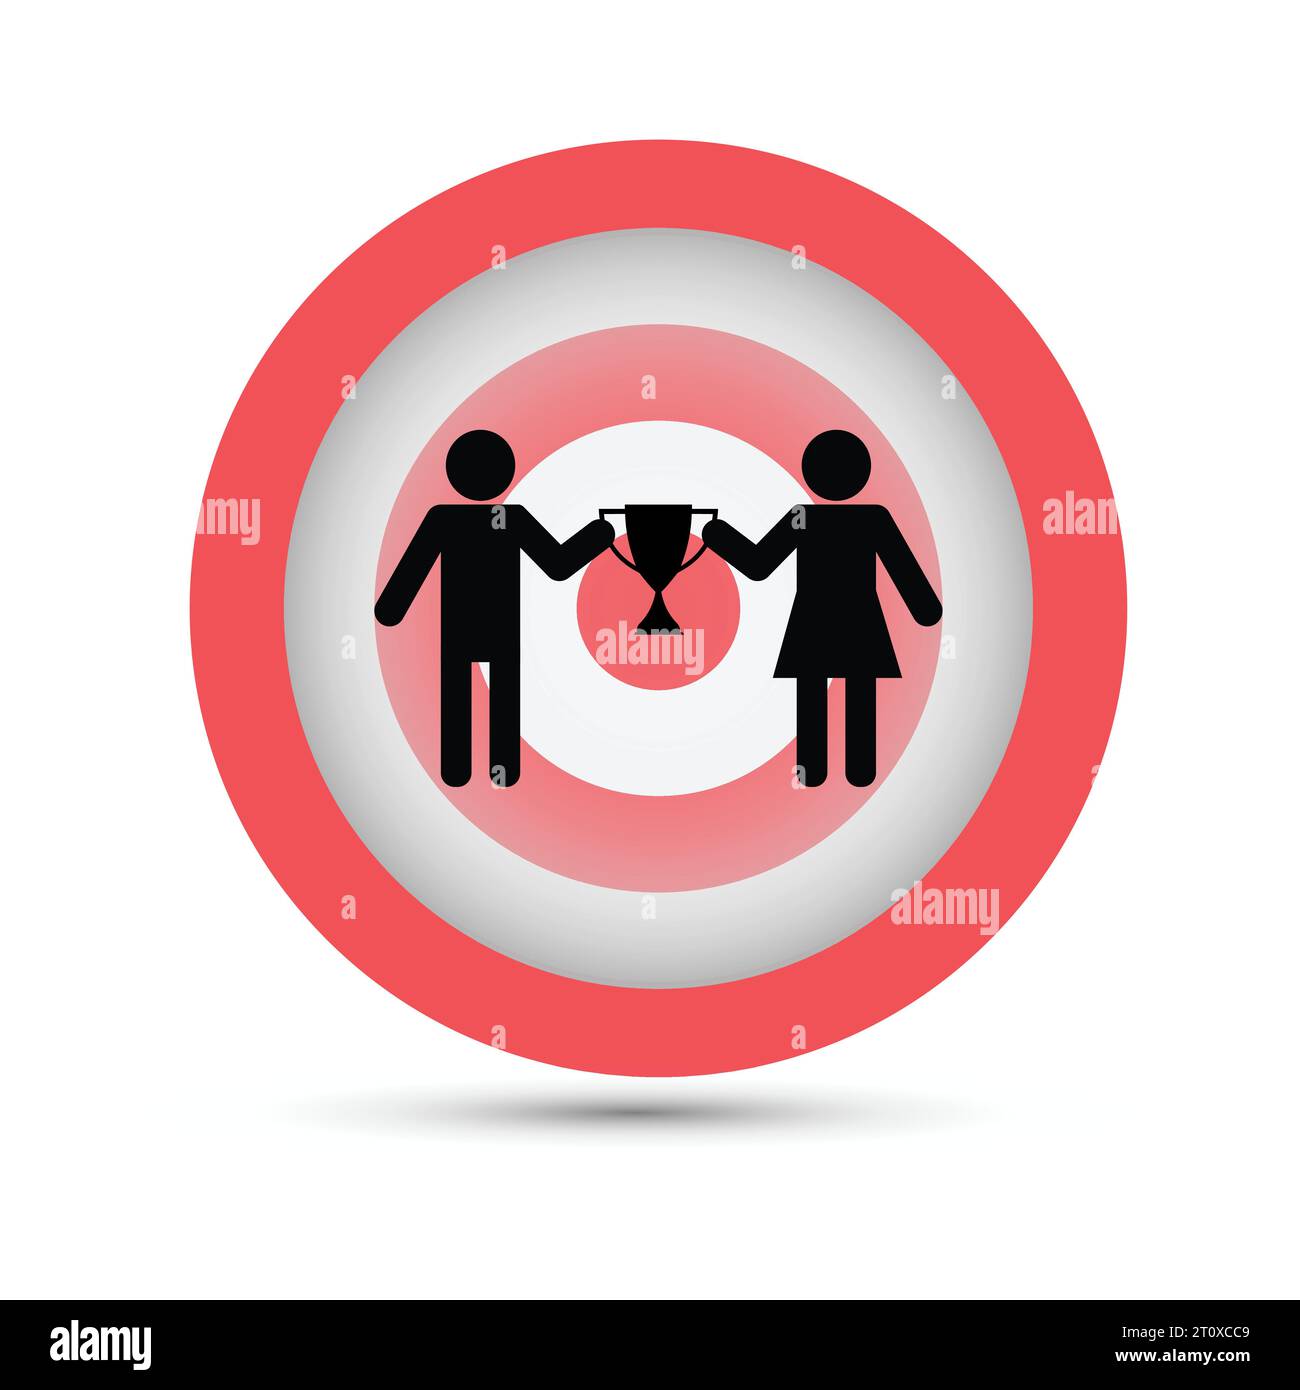 Silhouette of a man and a woman holding a cup on a target Stock Vector